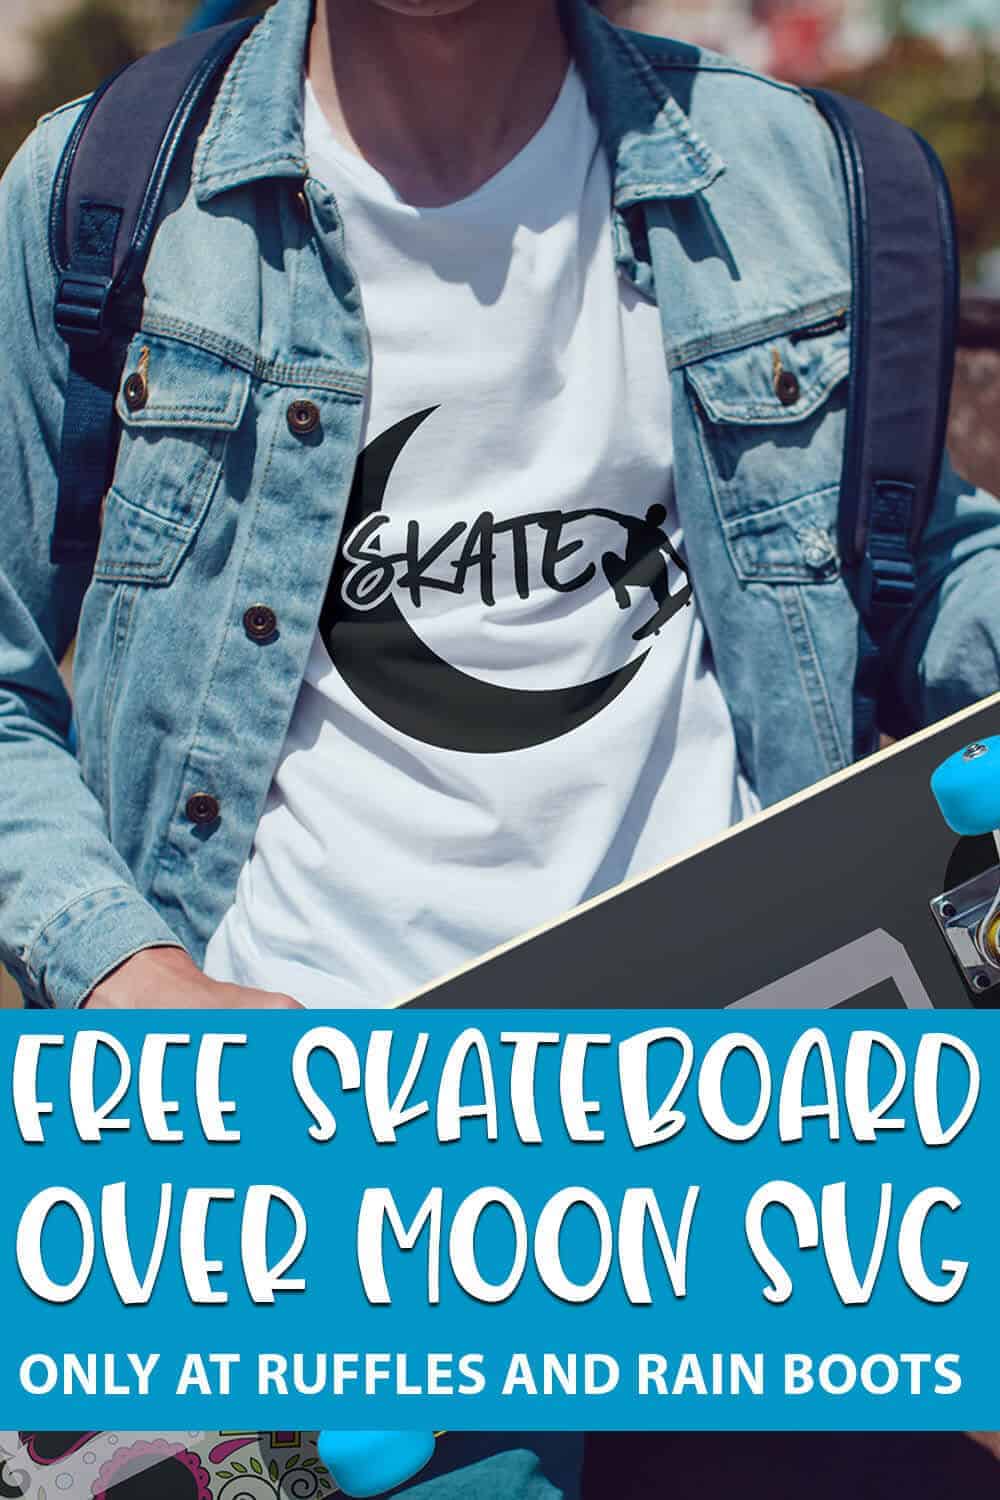 Skateboard Over the Moon cut file set for cricut or silhouette with text which reads free skateboard over moon svg